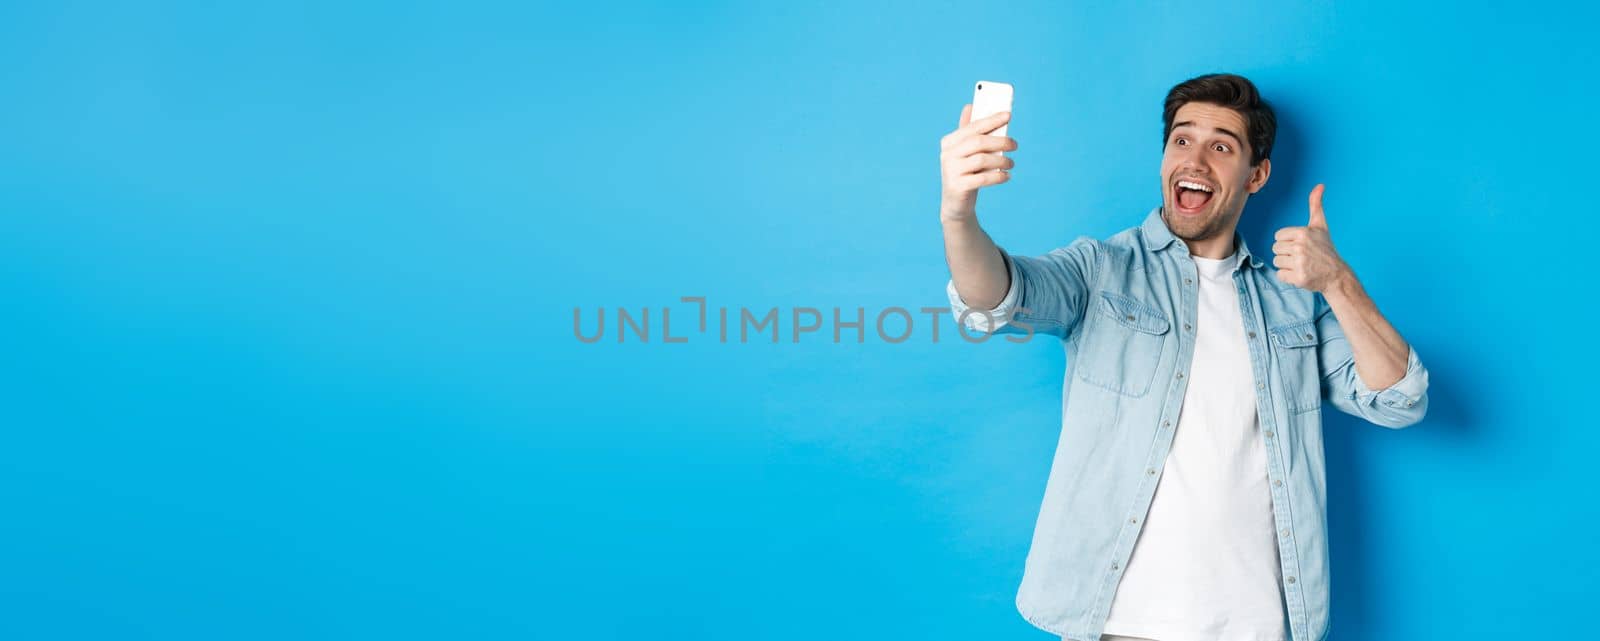 Happy man taking selfie and showing thumb up in approval on blue background, holding mobile phone.